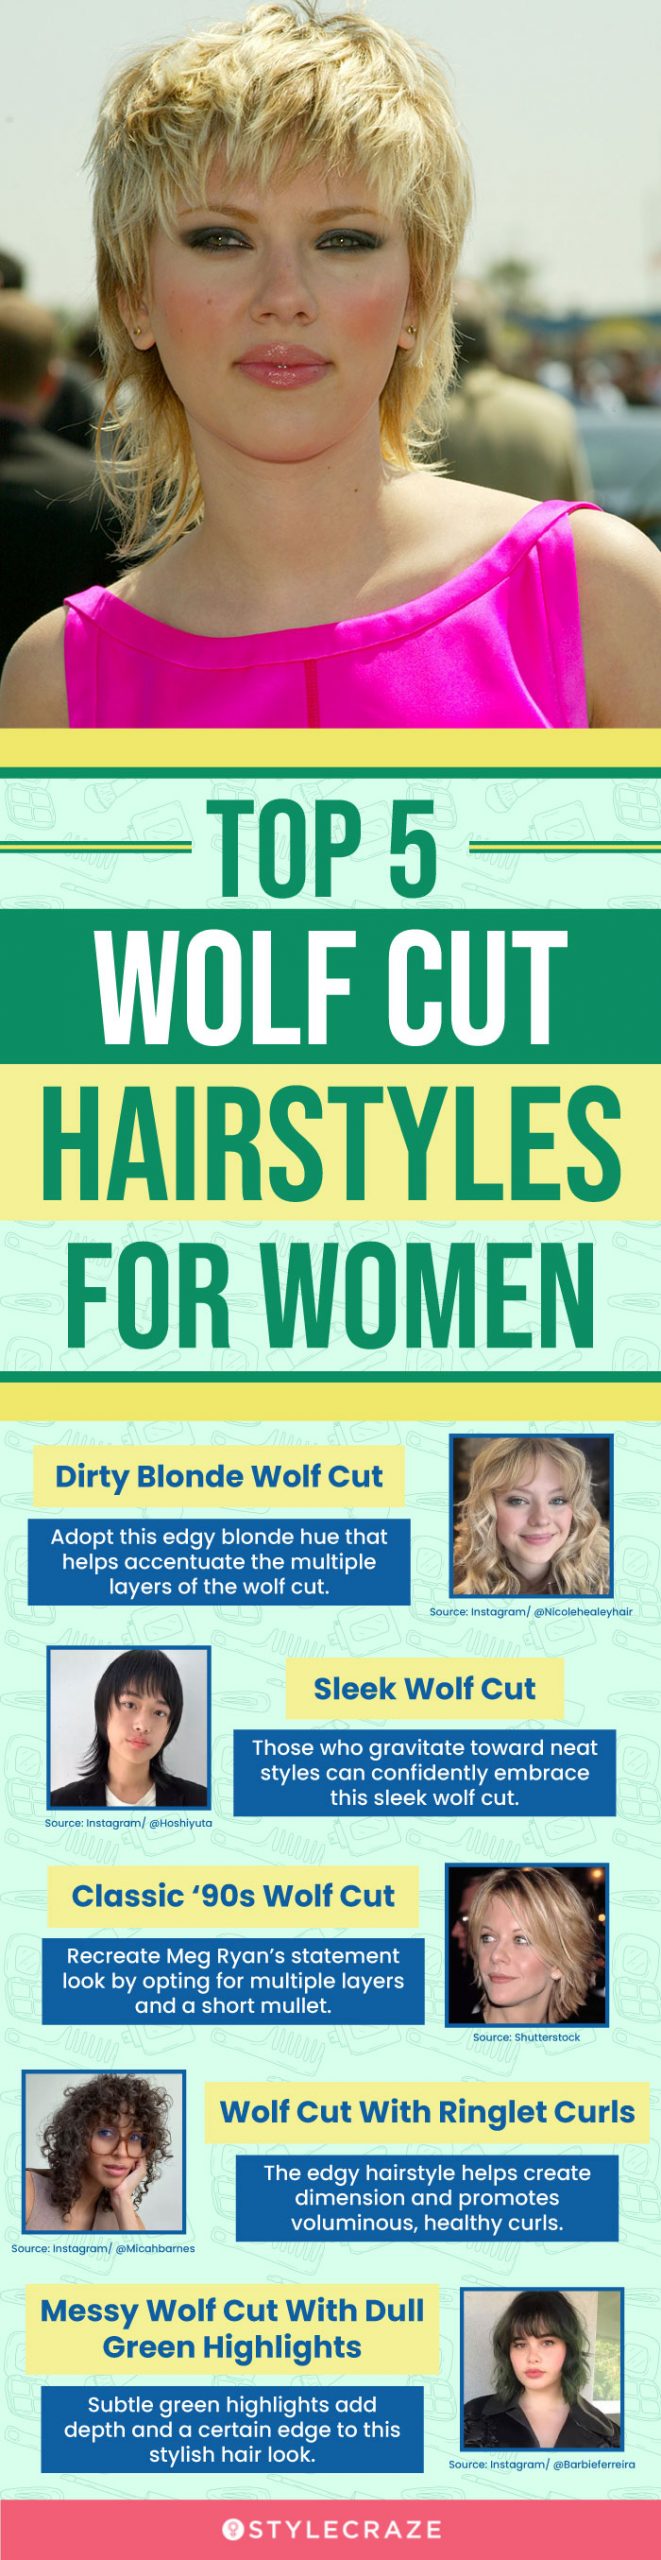 top 5 wolf cut hairstyles for women (infographic)